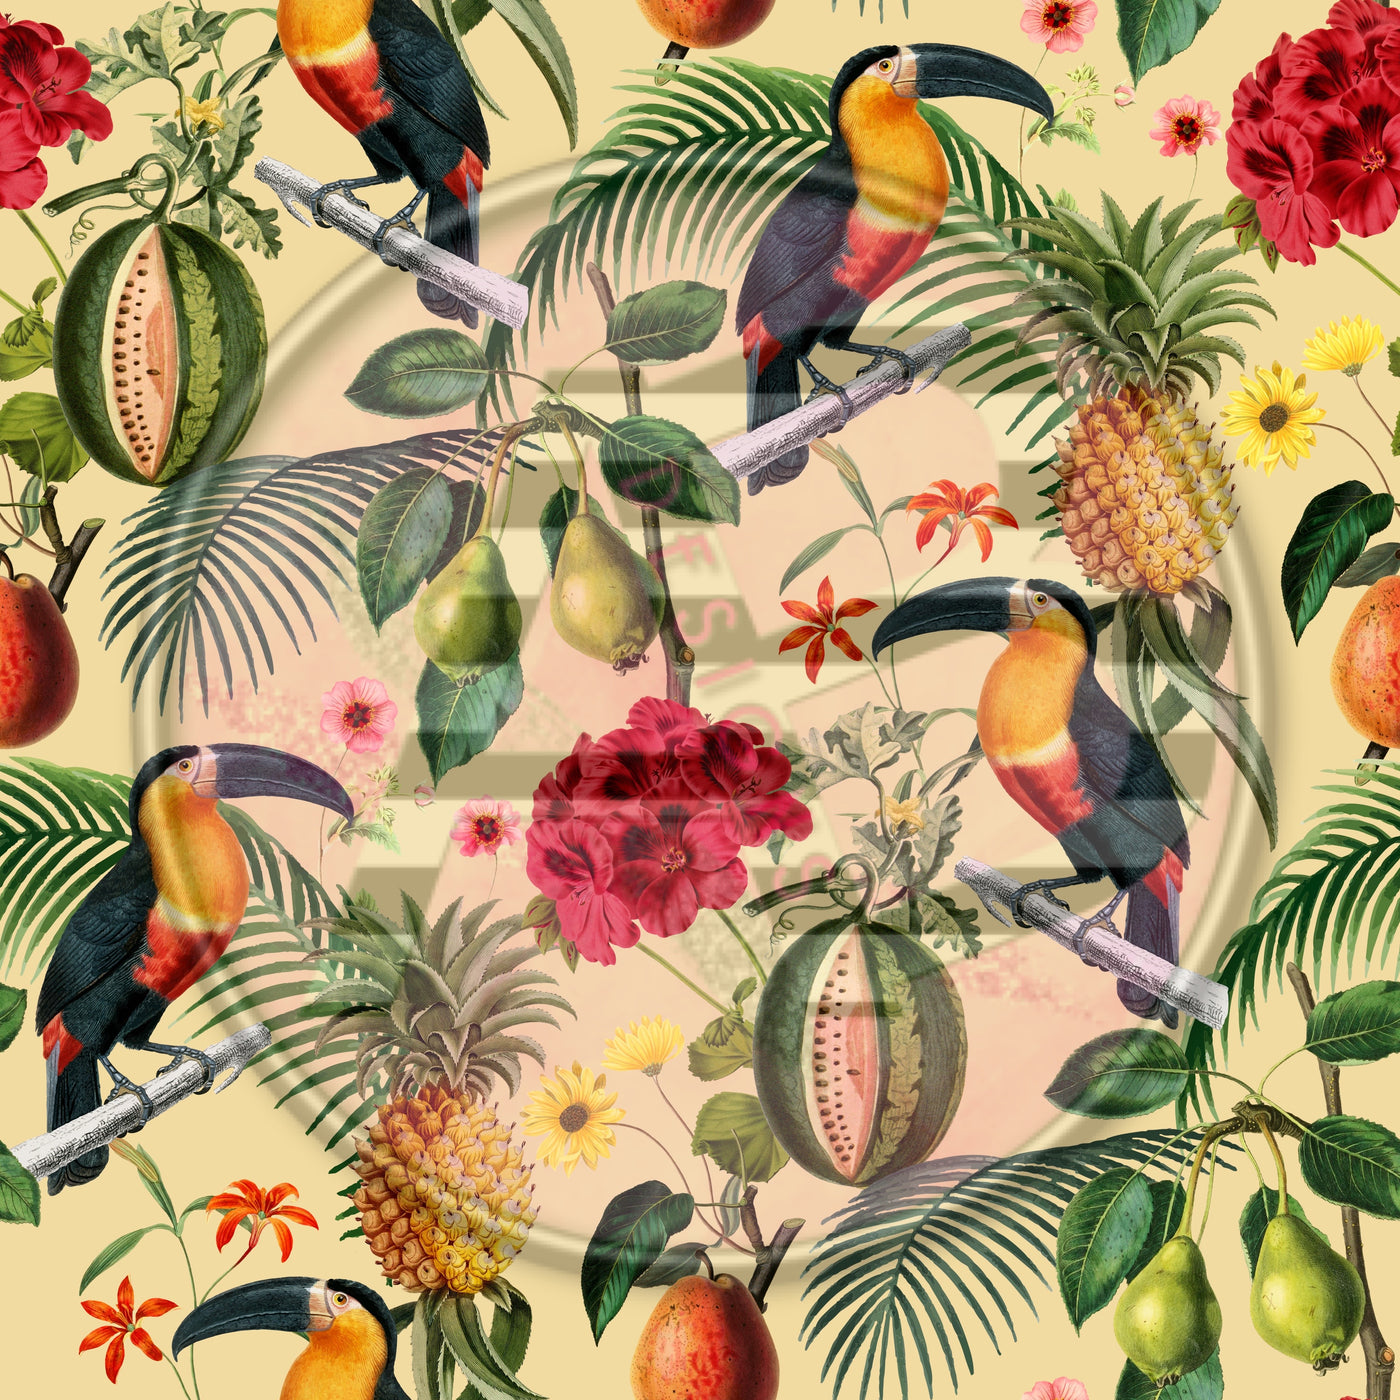 Adhesive Patterned Vinyl - Tropical 1771